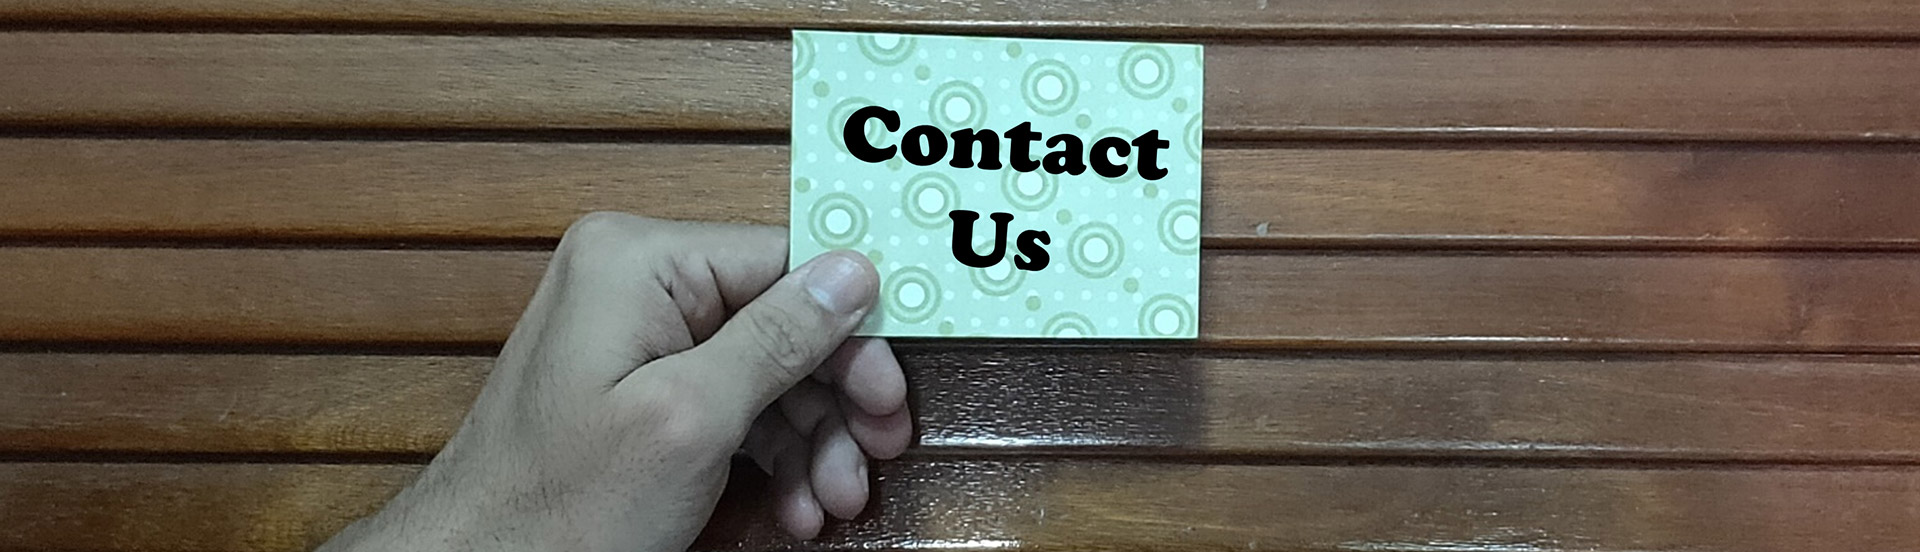 Contact Us banner image